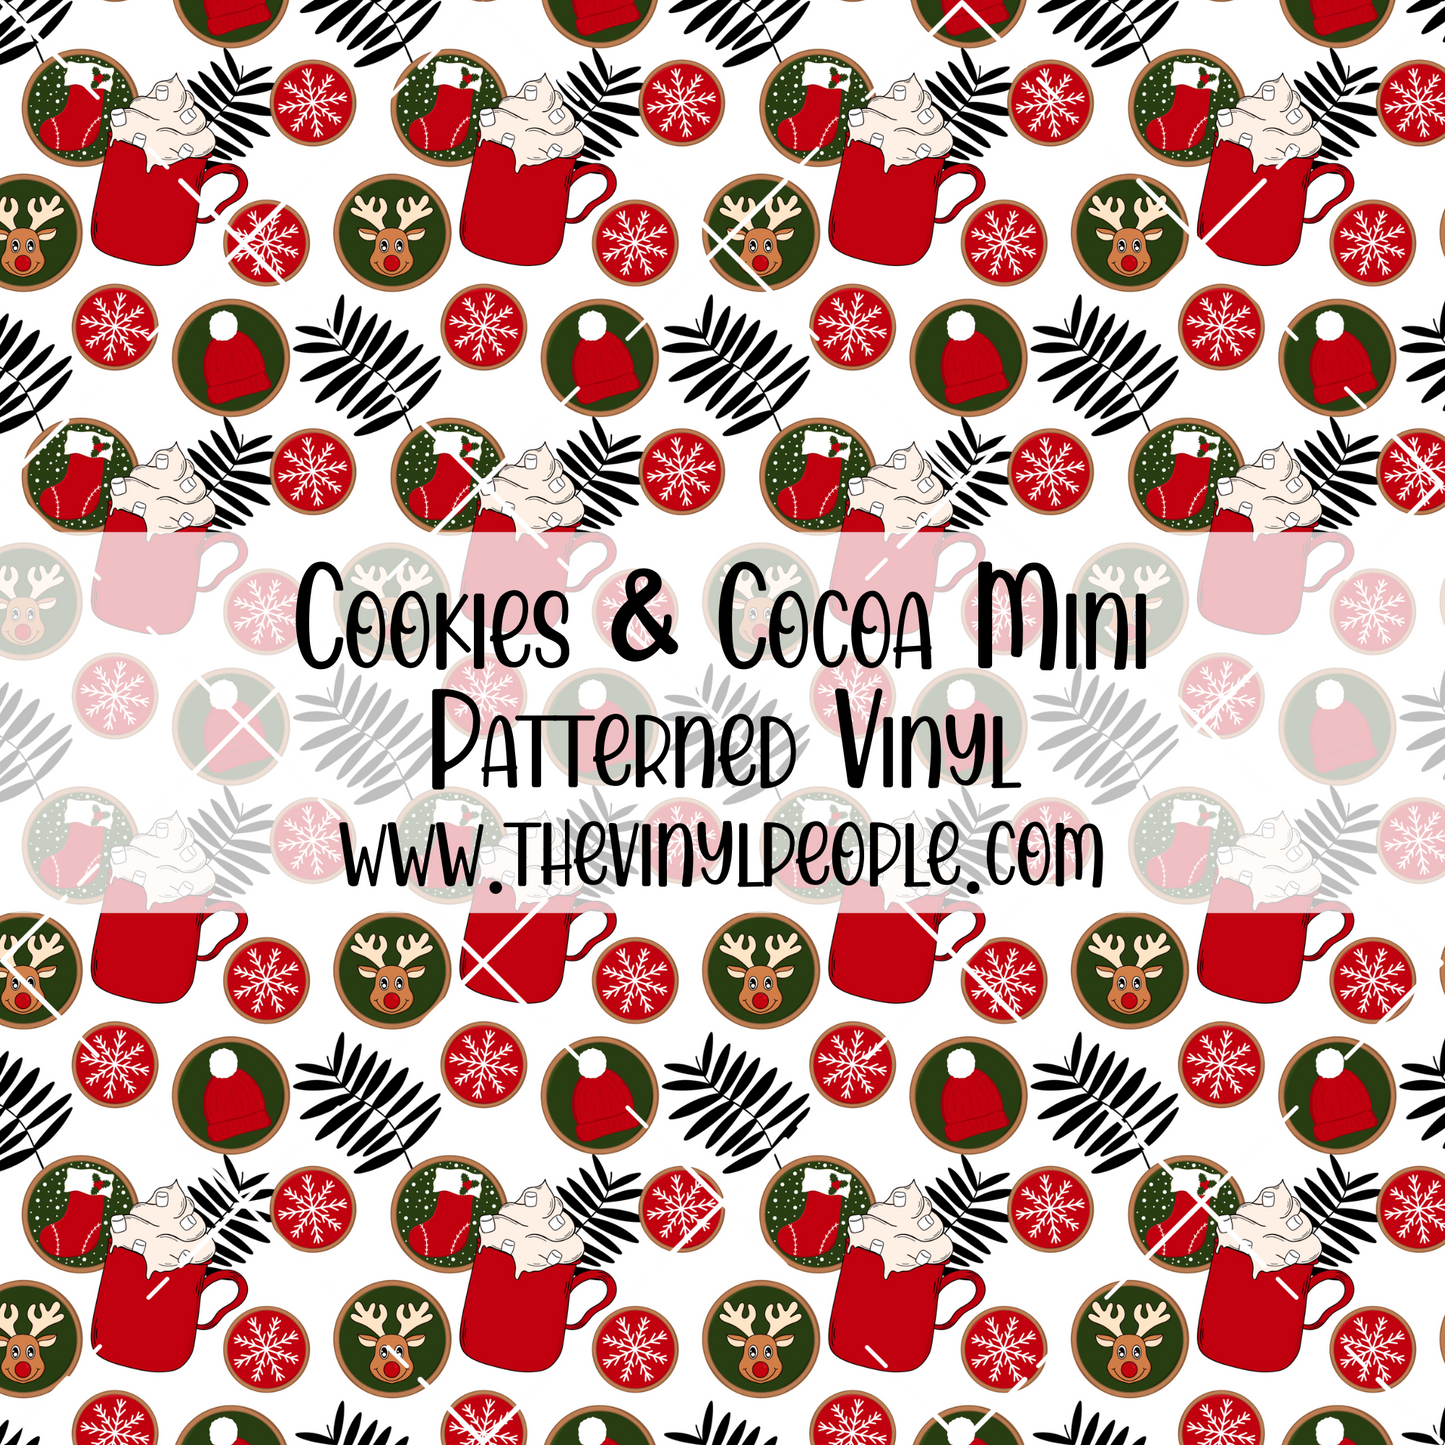 Cookies & Cocoa Patterned Vinyl